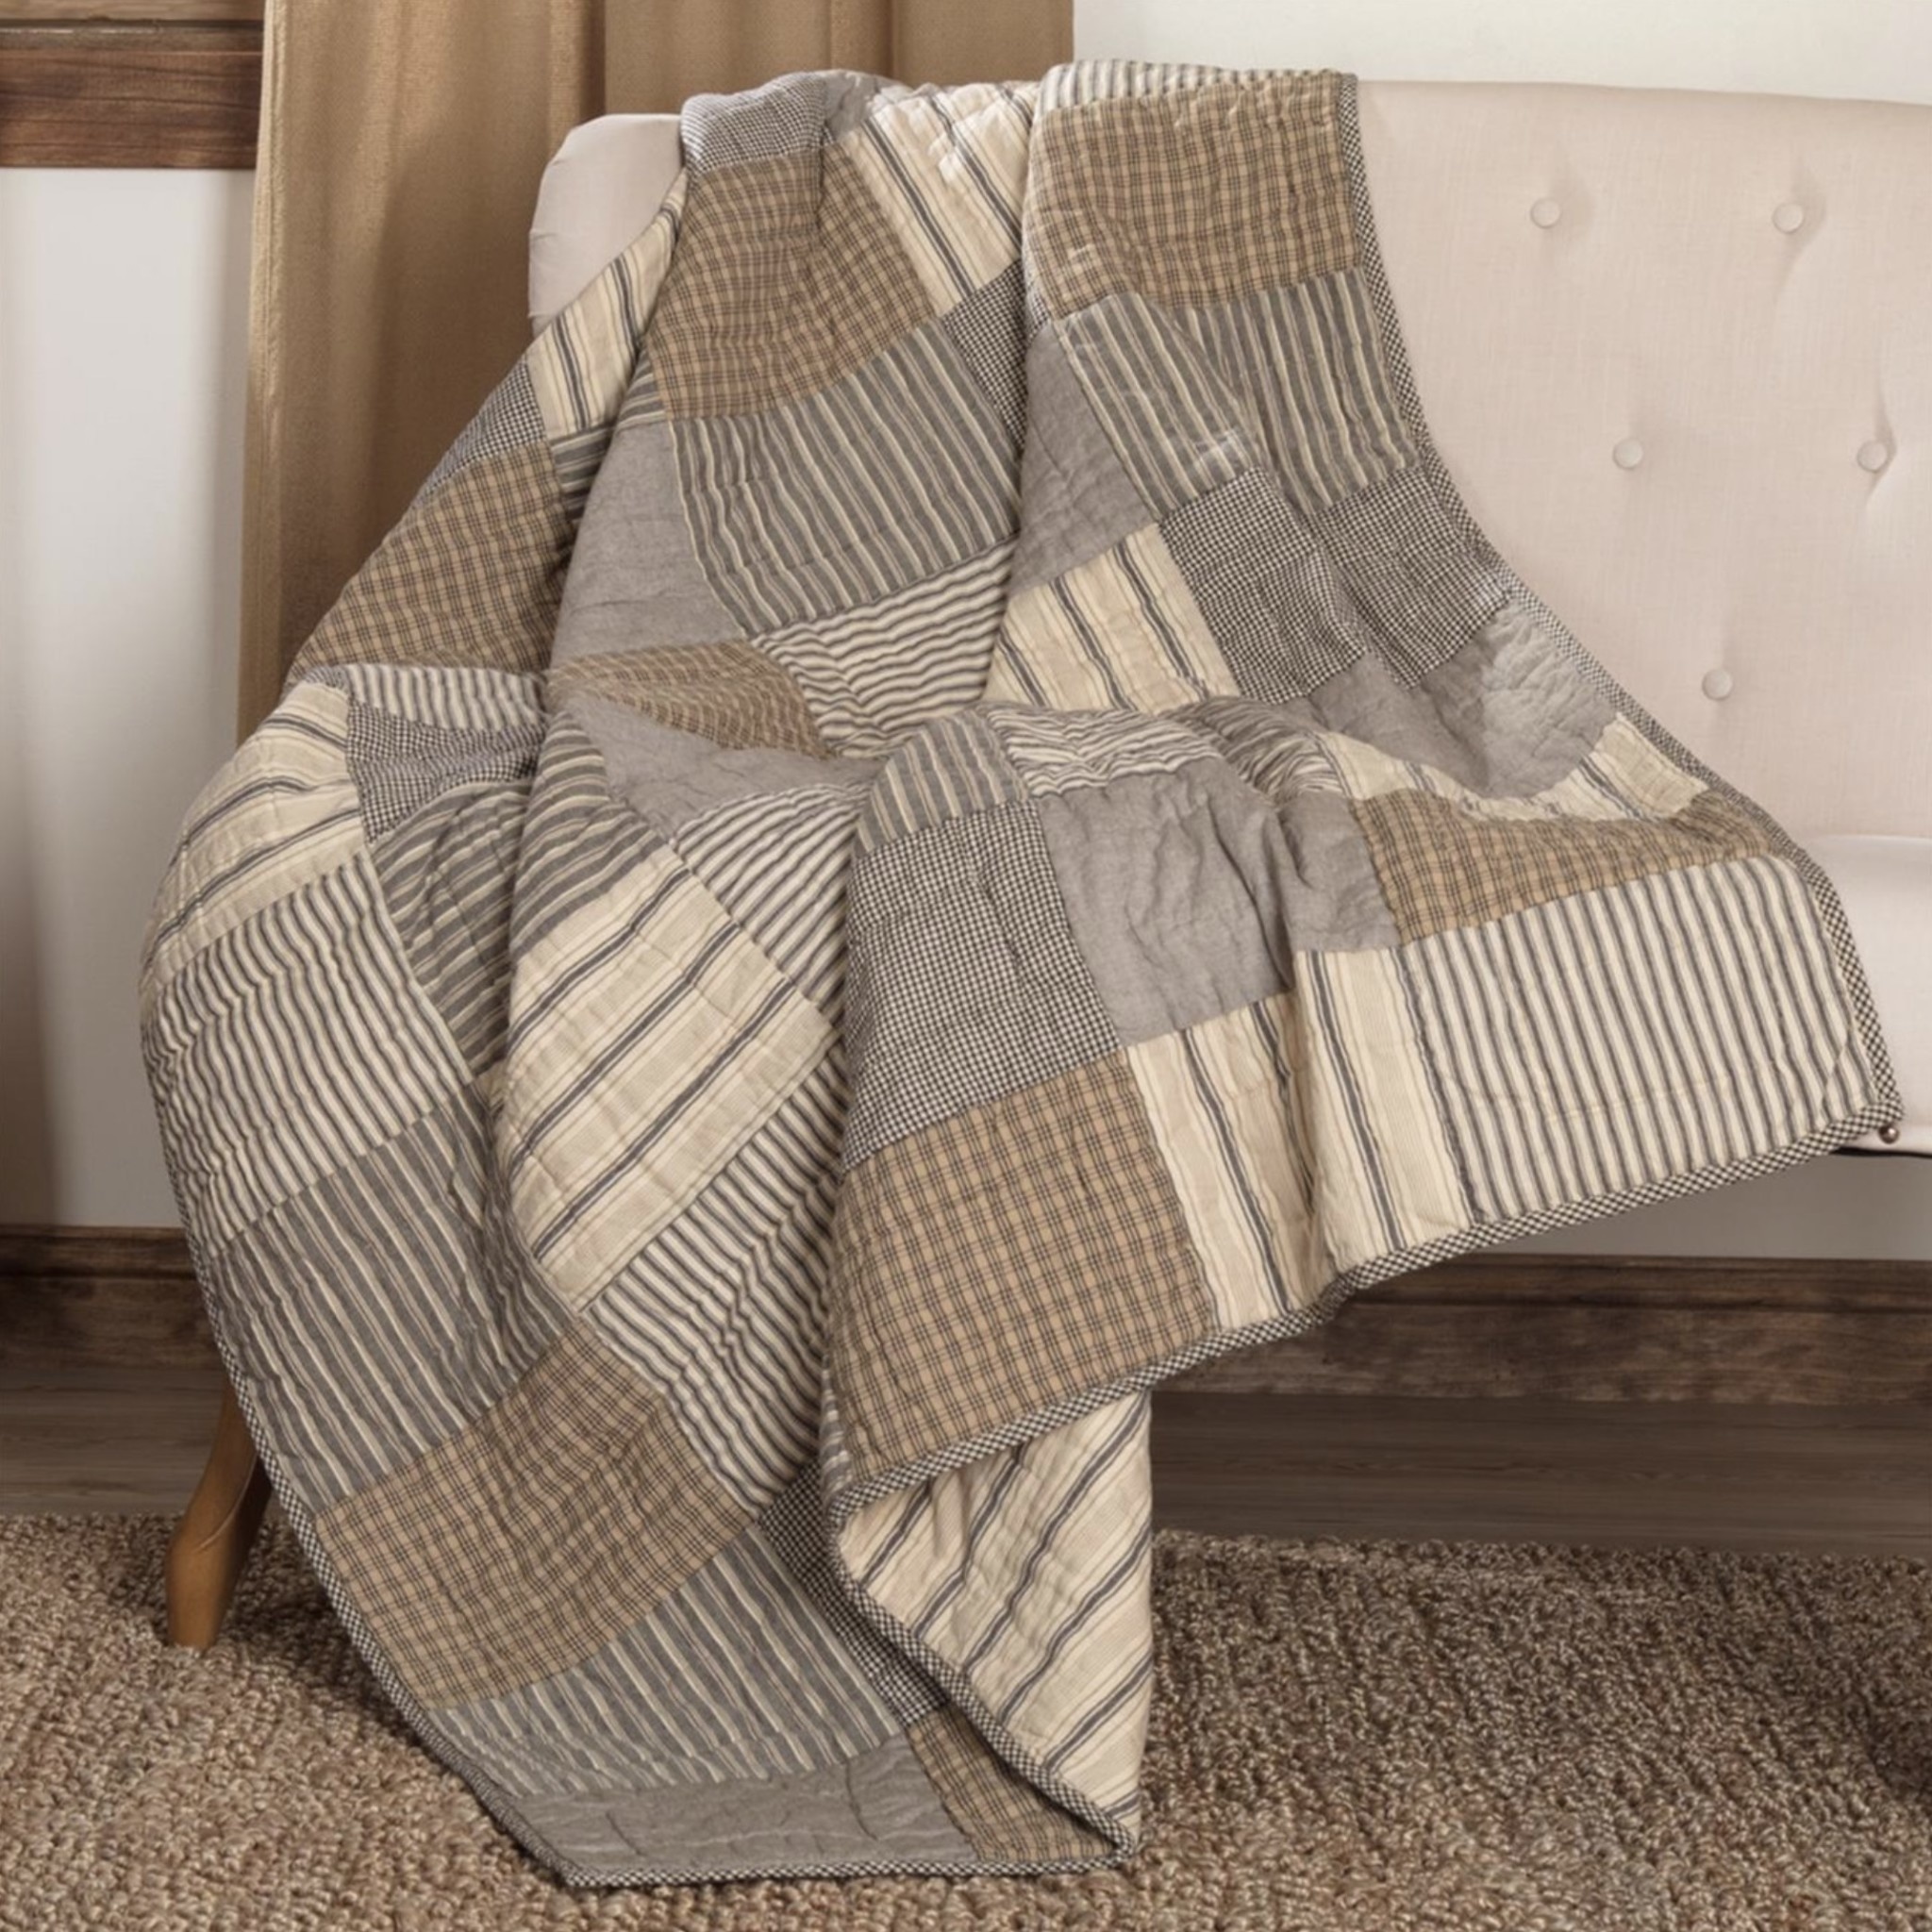 VHC Brands Sawyer Mill Charcoal Block Quilted Throw 60" x 50" Brand: VHC Brands